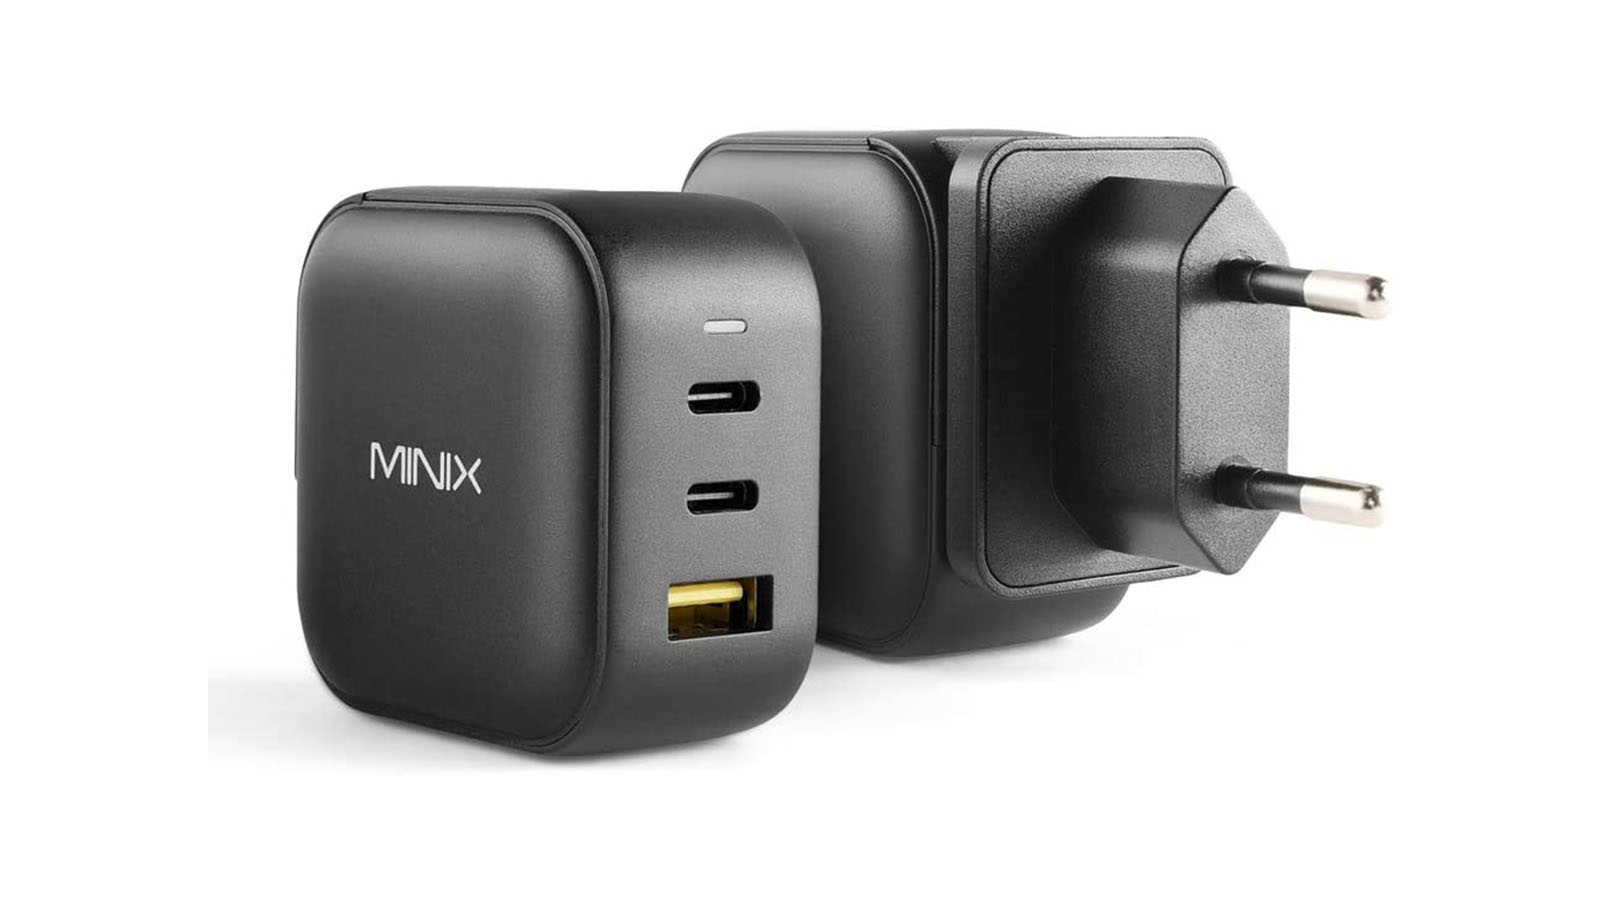 Minix 66W NEO P1 Turbo Wall Charger - Le meilleur chargeur multiport 